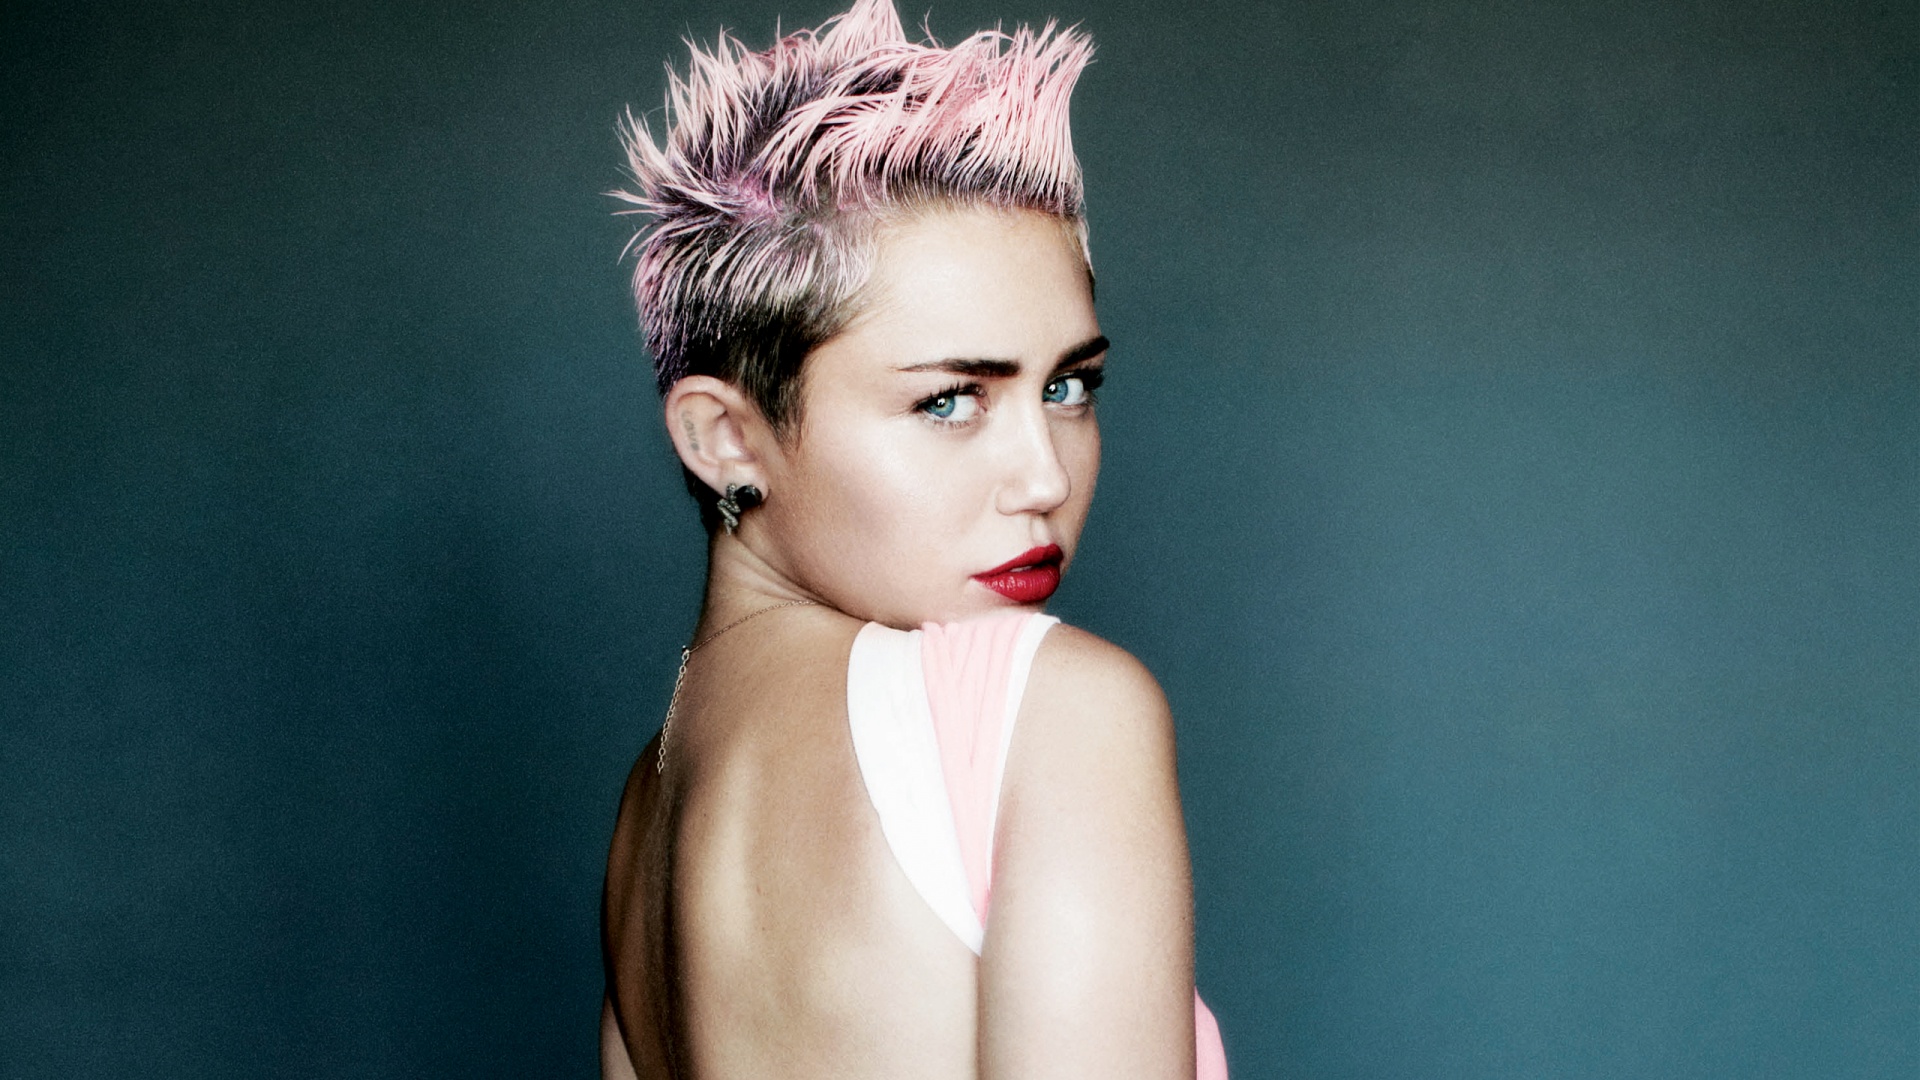 miley cyrus pictures hd A46